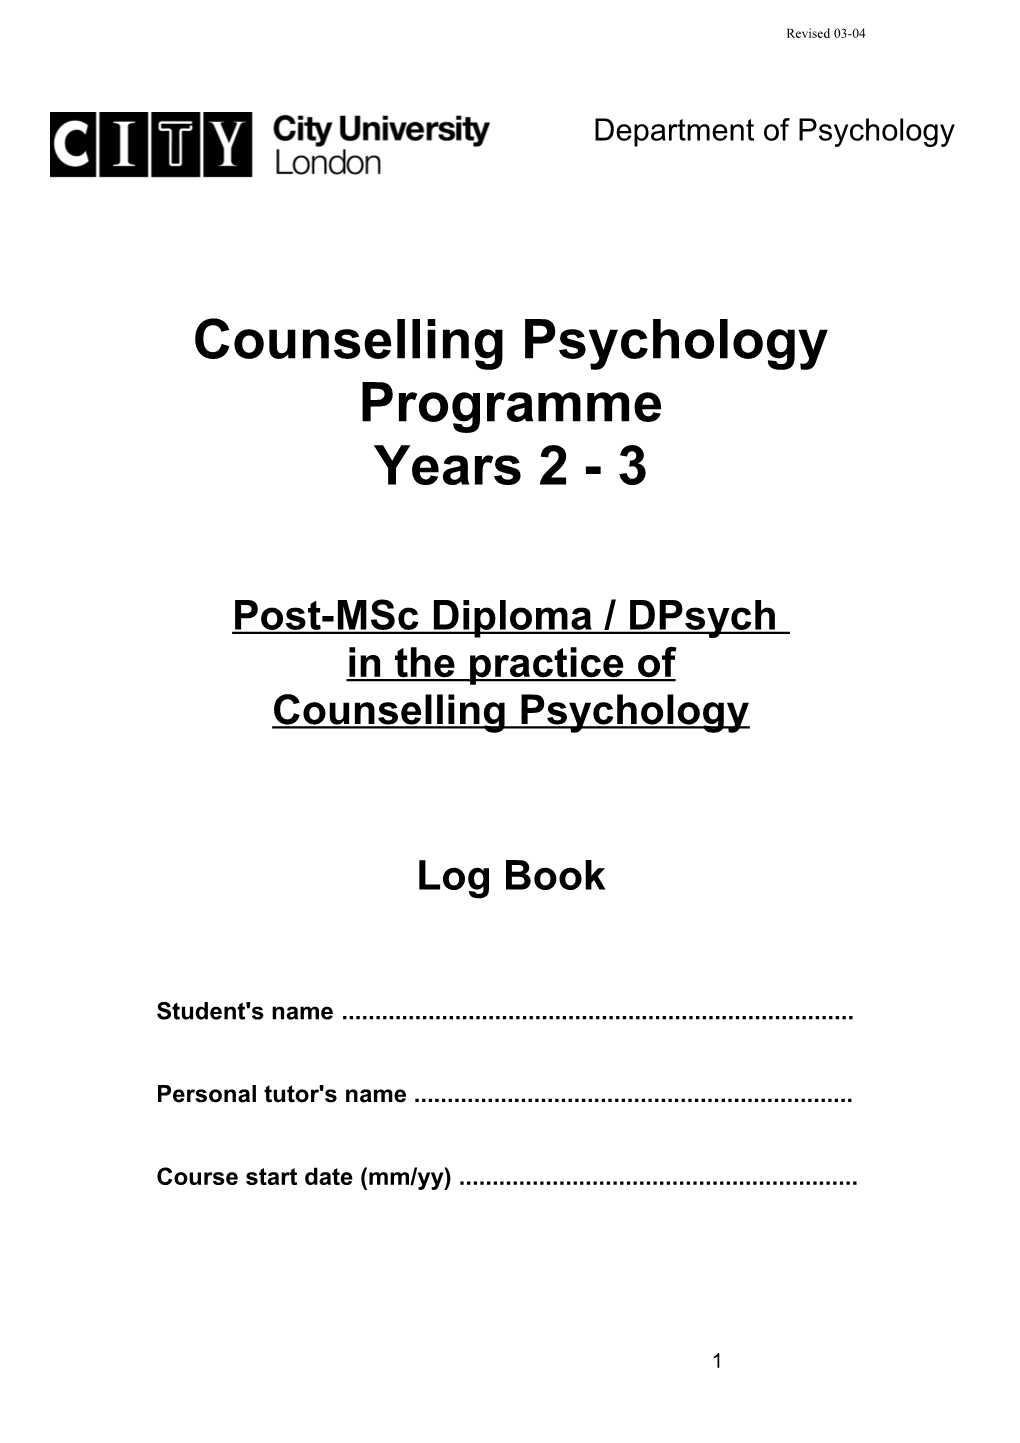 City University - About the Log Book - Counselling Psychology Year 2-3